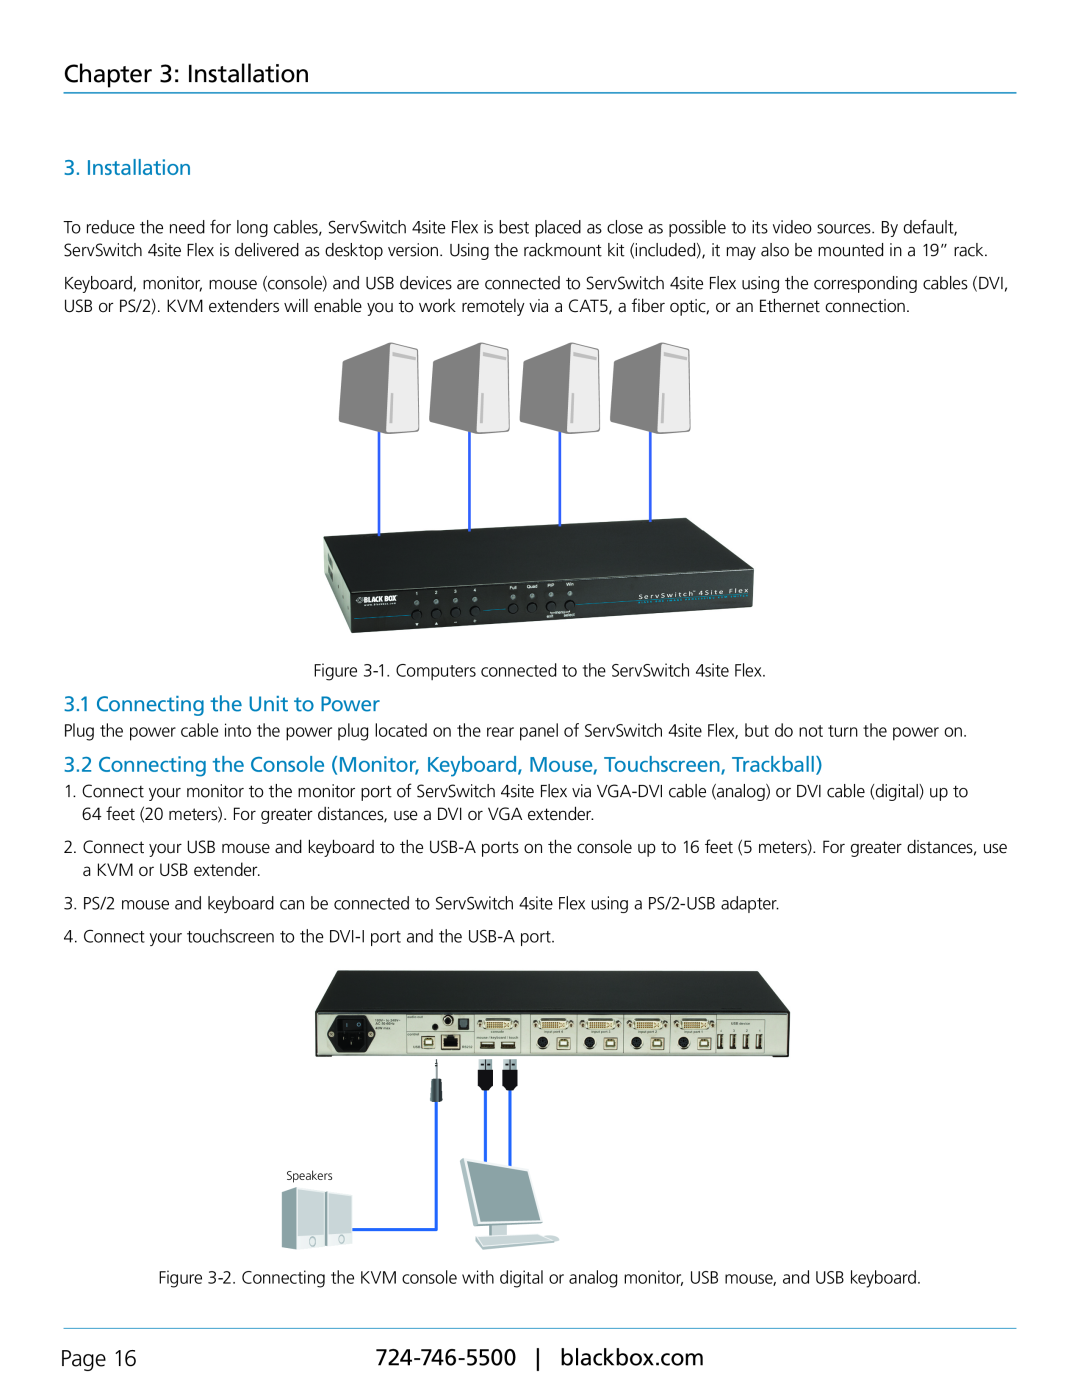 Black Box KVP40004A, servswitch 4site flex manual Installation, Connecting the Unit to Power, Page 